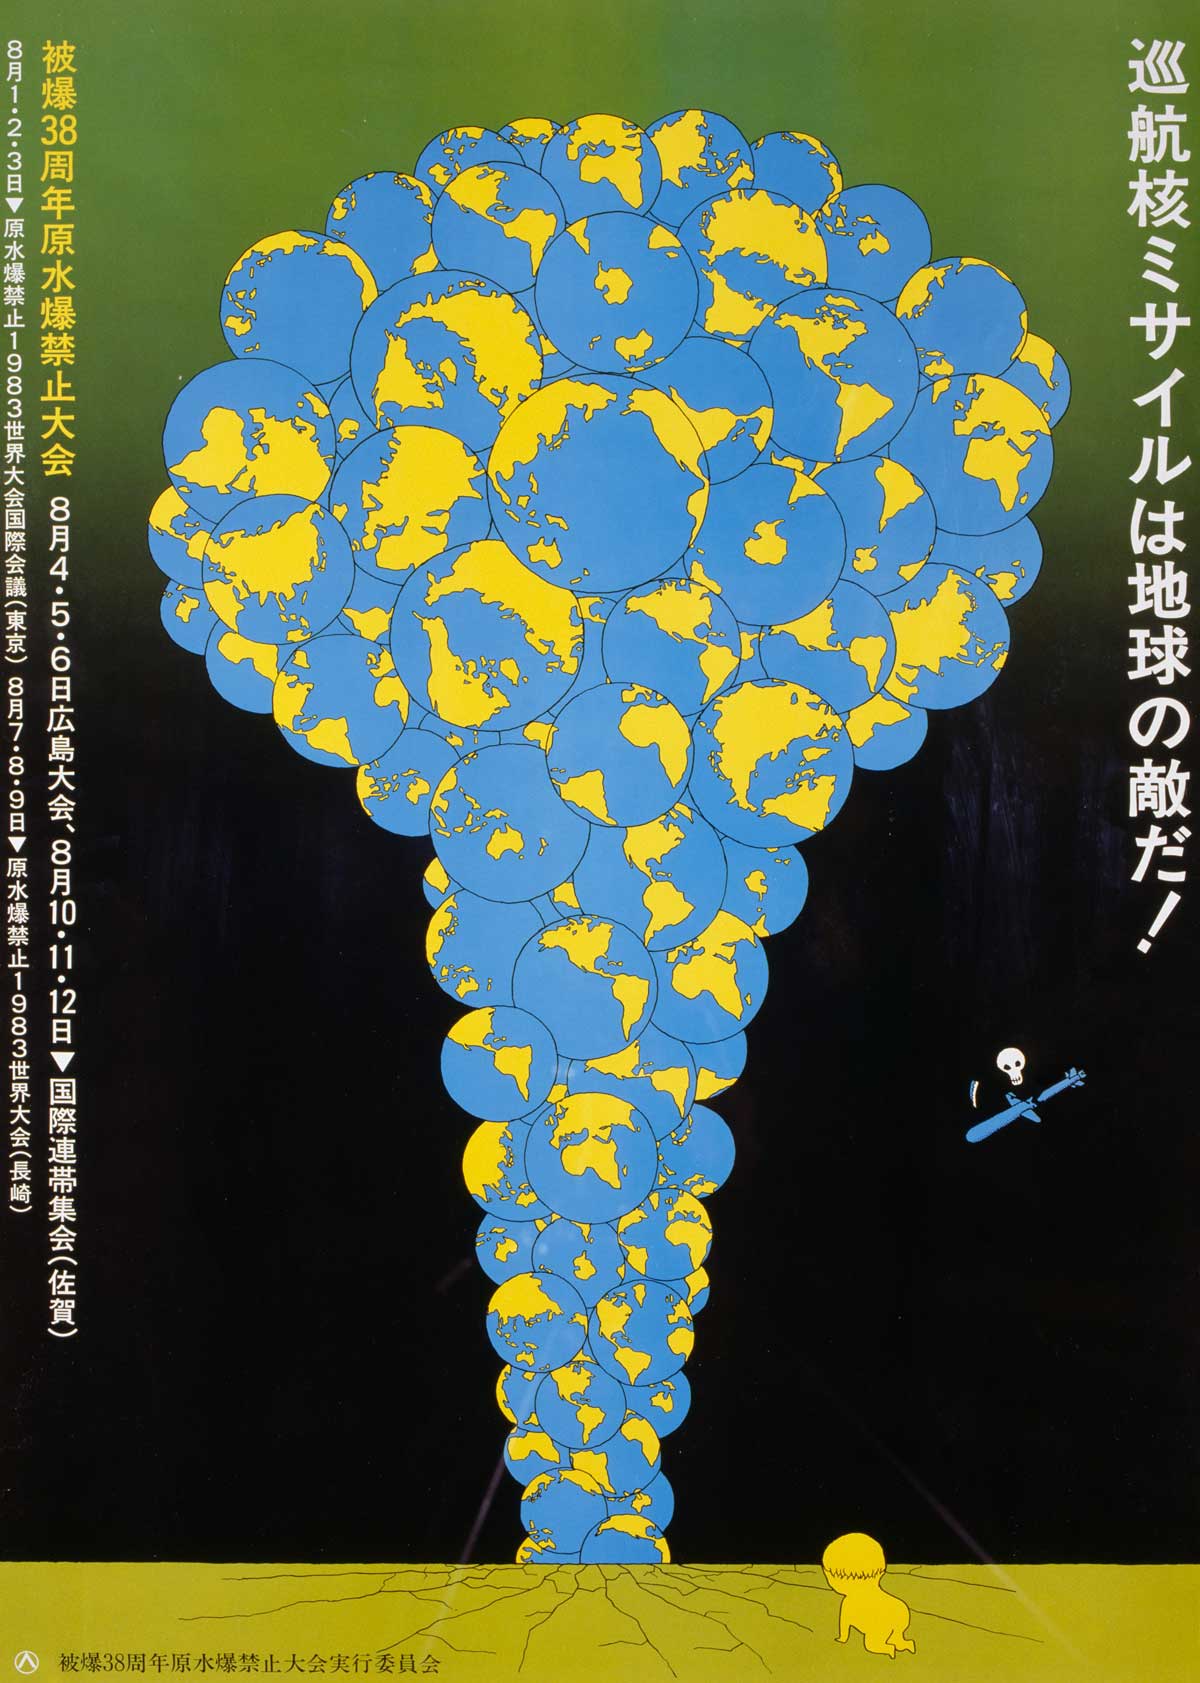 Japanese peace campaign poster produced during the Cold War, 1985. Getty Images.